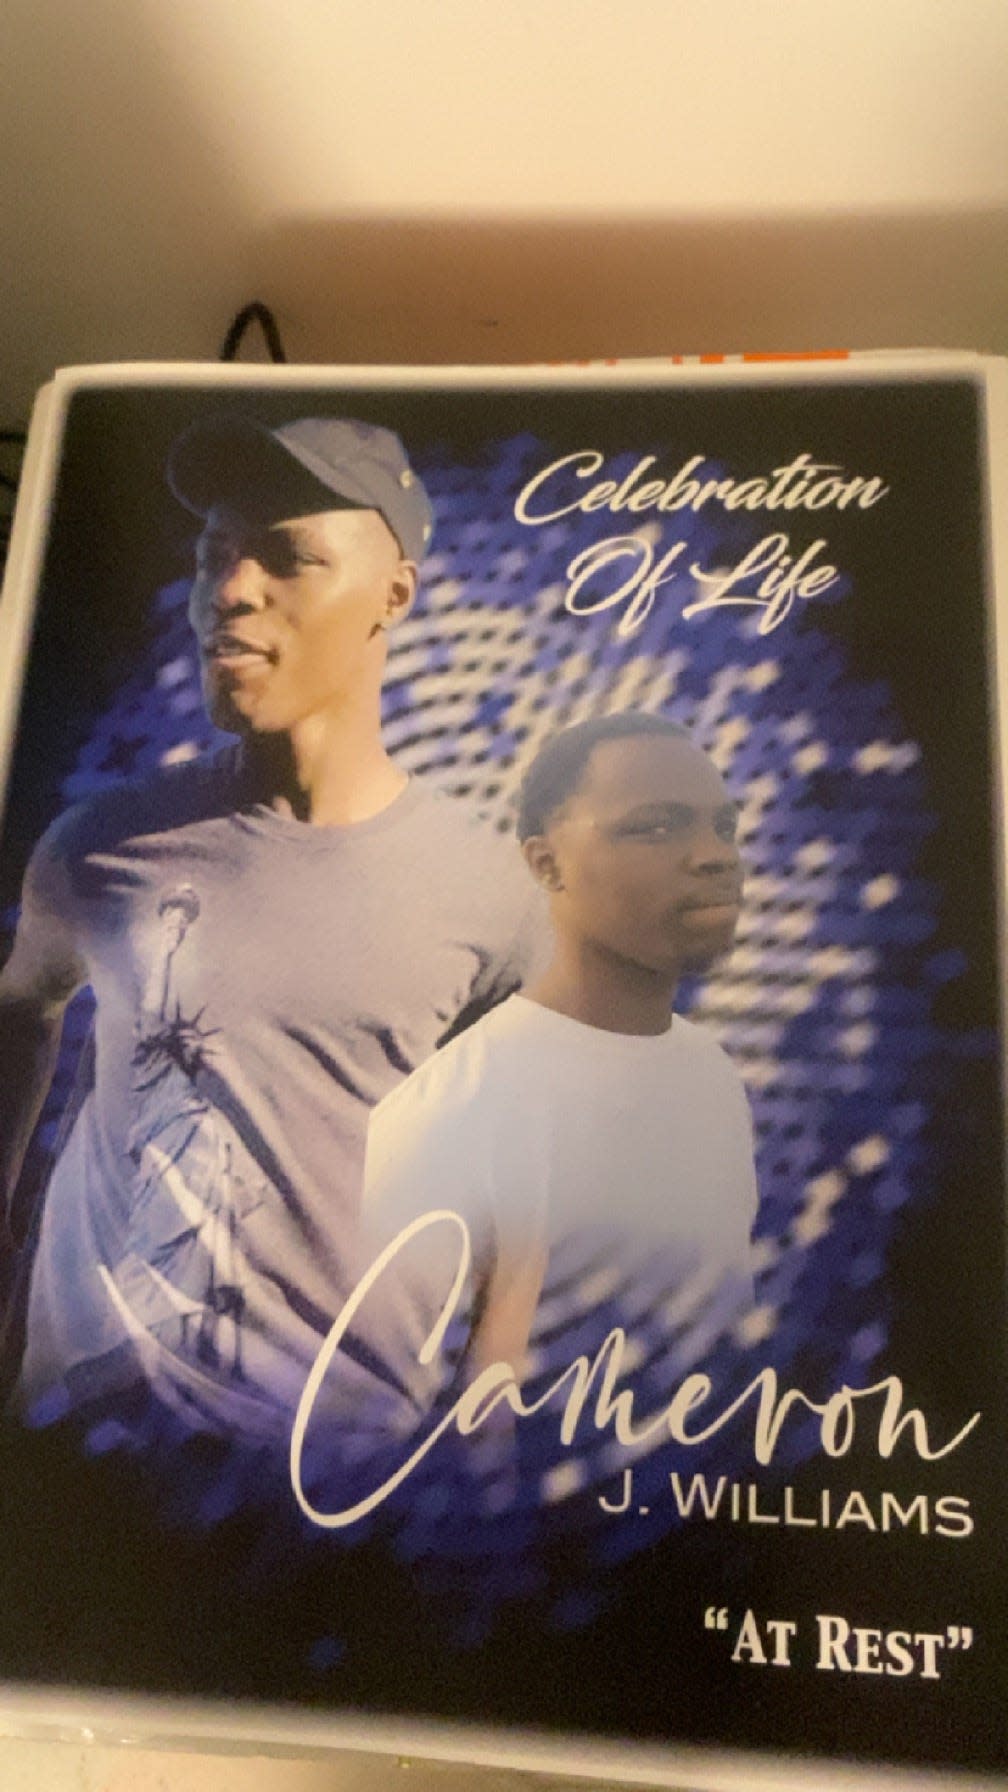 A poster created by a family member for Williams' celebration of life.